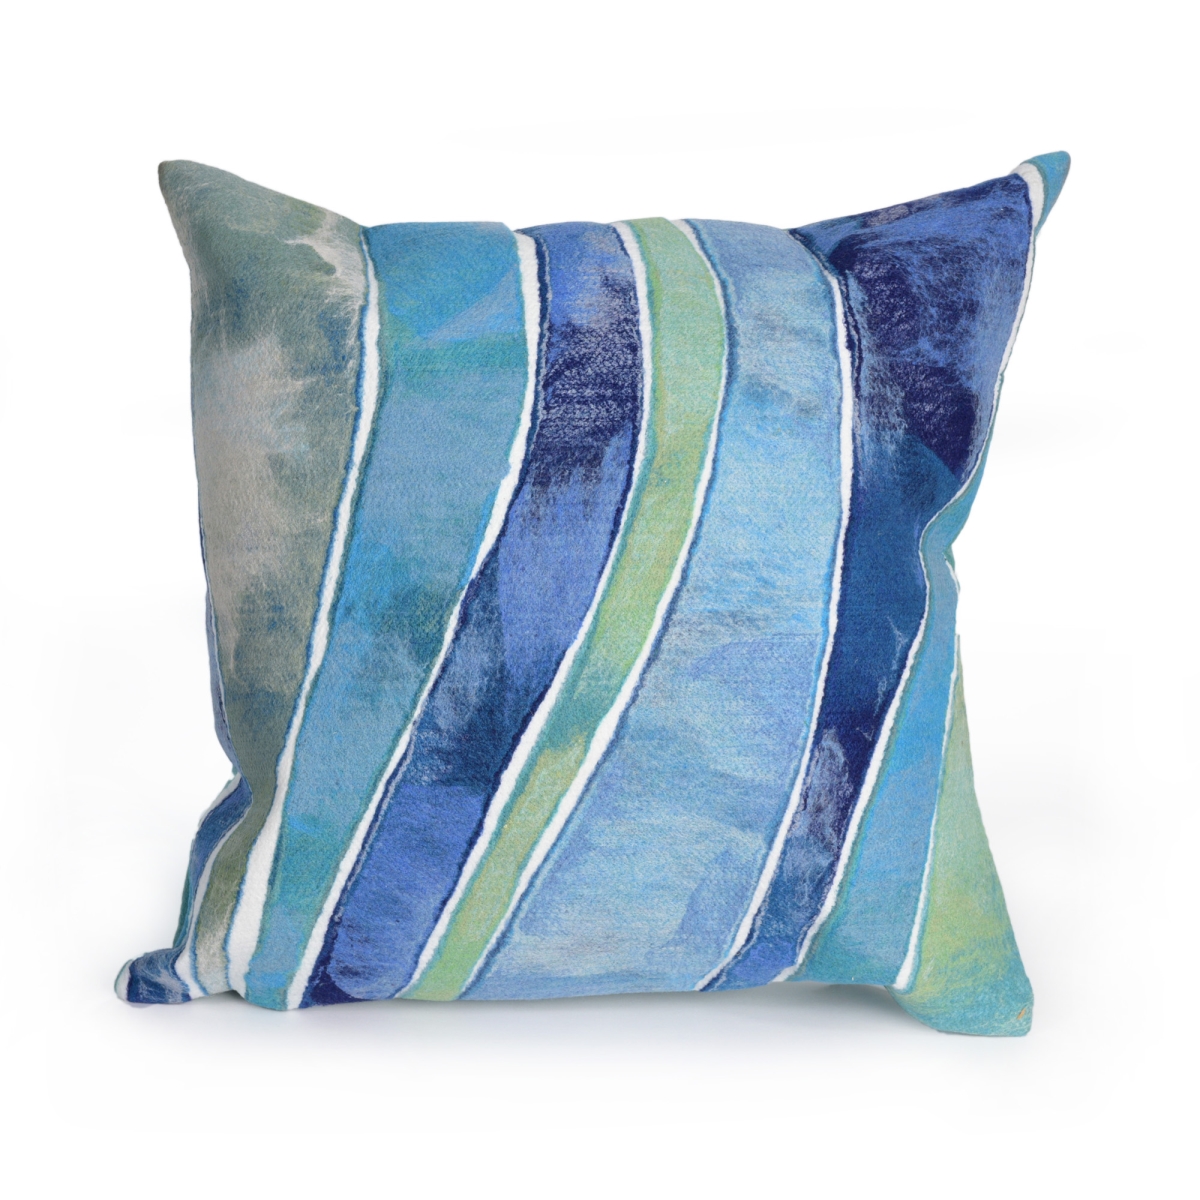 Trans-ocean Imports 7sc1s312604 12 X 20 In. Liora Manne Visions Iii Waves Indoor & Outdoor Pillow, Blue